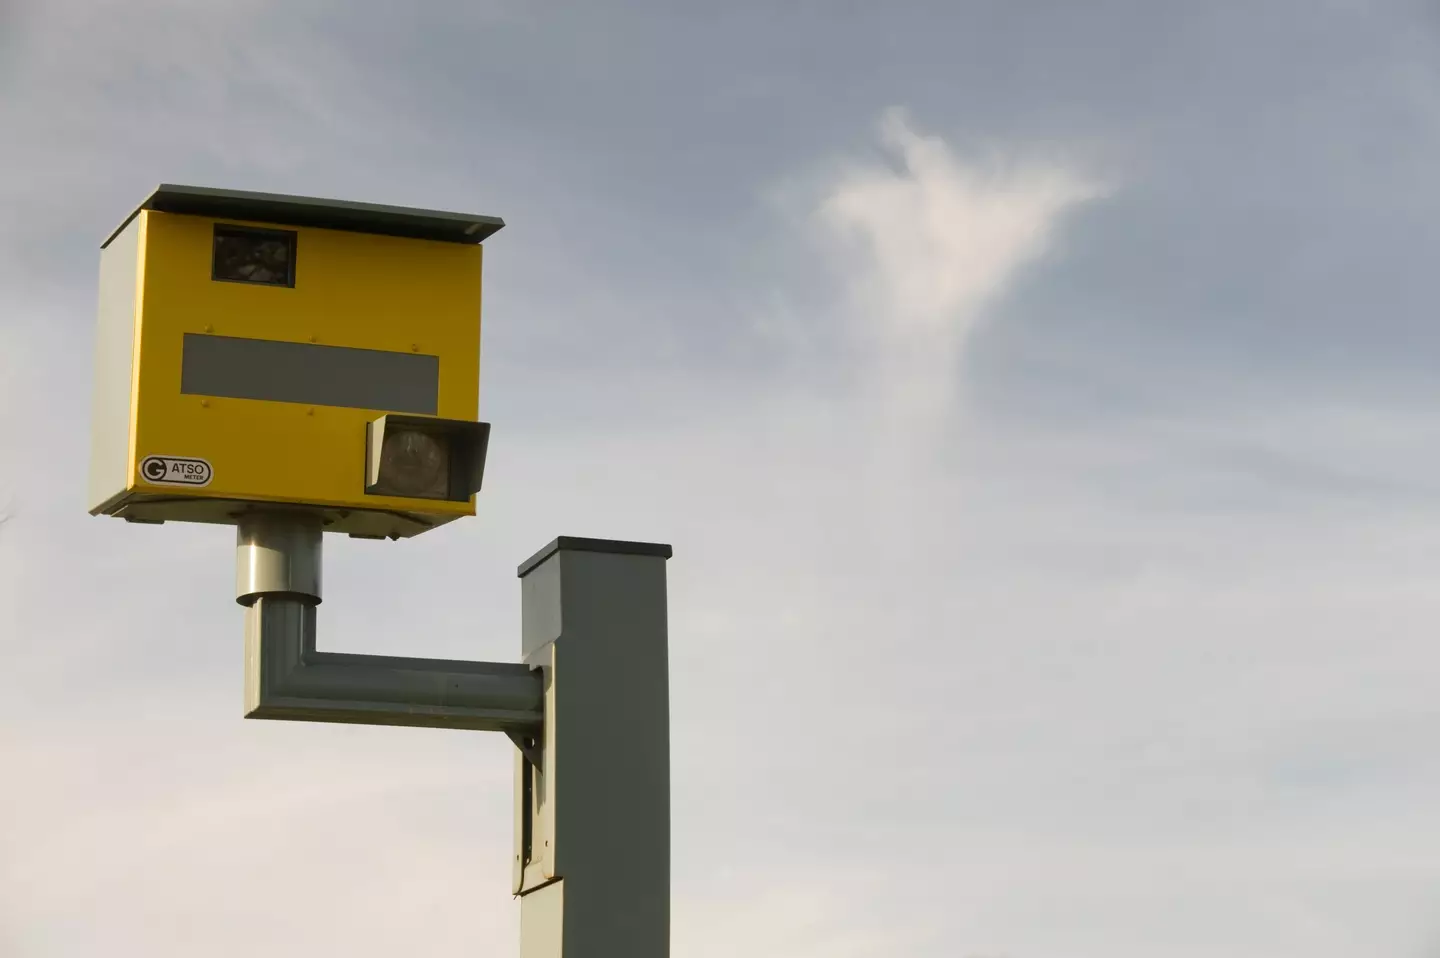 Thomas addressed a number of speed camera myths.